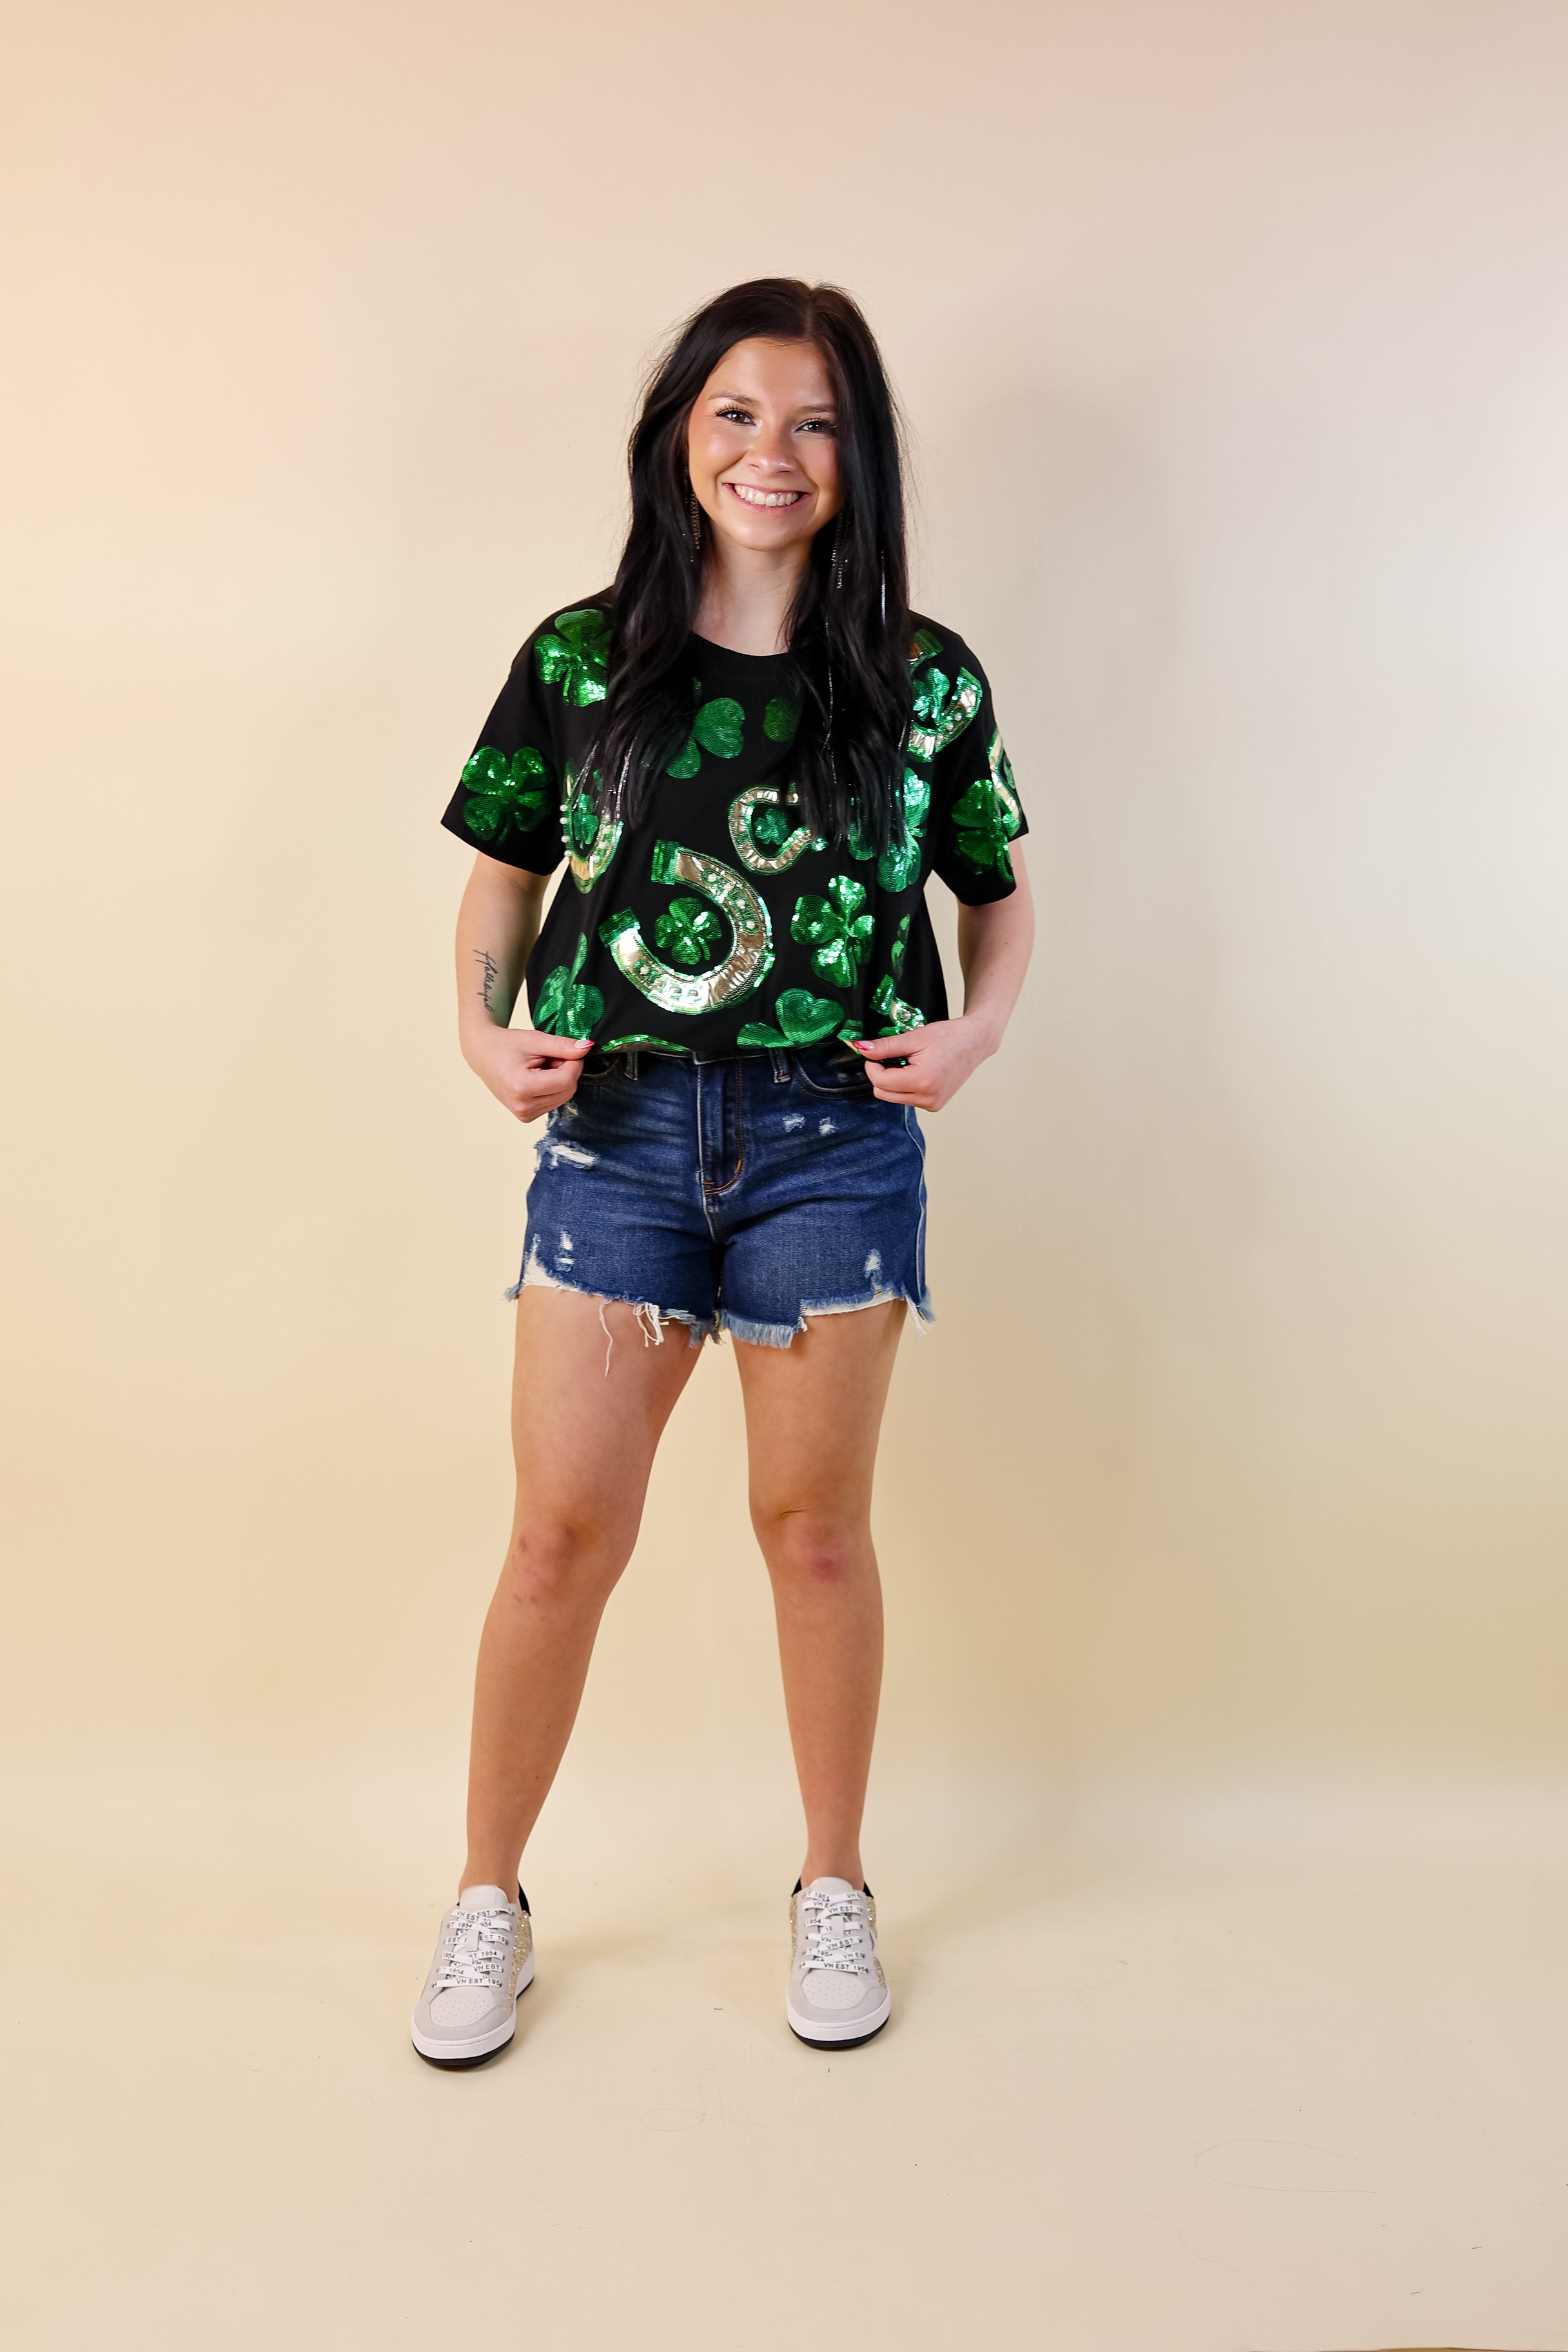 Queen Of Sparkles | Lucky Charm Fully Sequined Clover and Horseshoe Tee in Black - Giddy Up Glamour Boutique